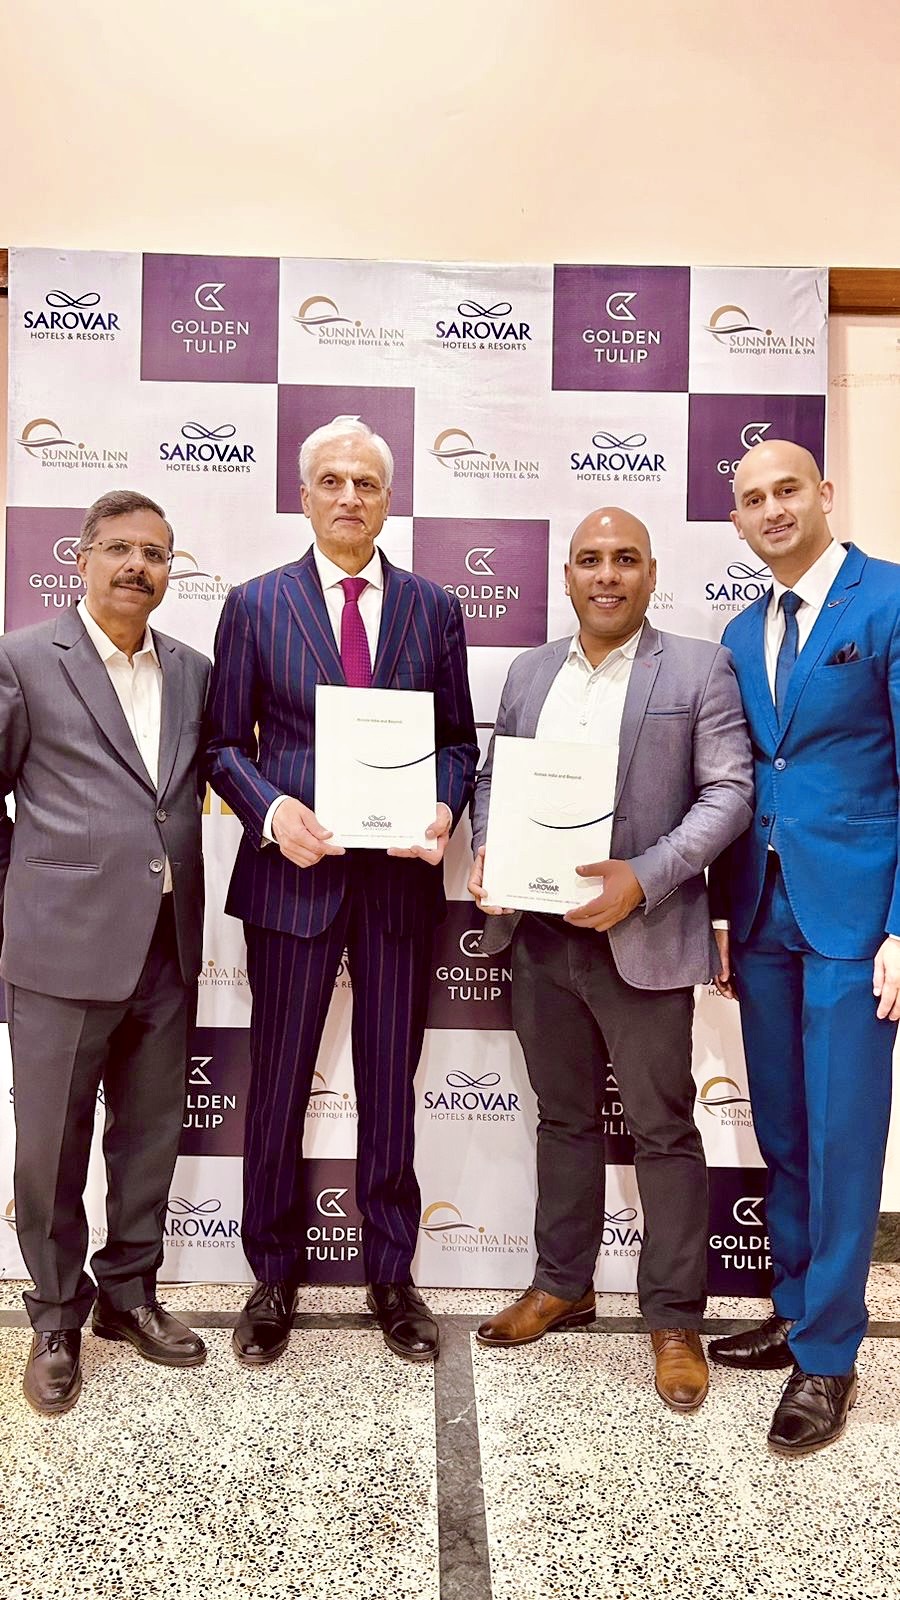 Sarovar Hotels & Resorts partners with Sunniva Inn Boutique Hotel & Spa to  launch the first Golden Tulip Hotel in Nepal